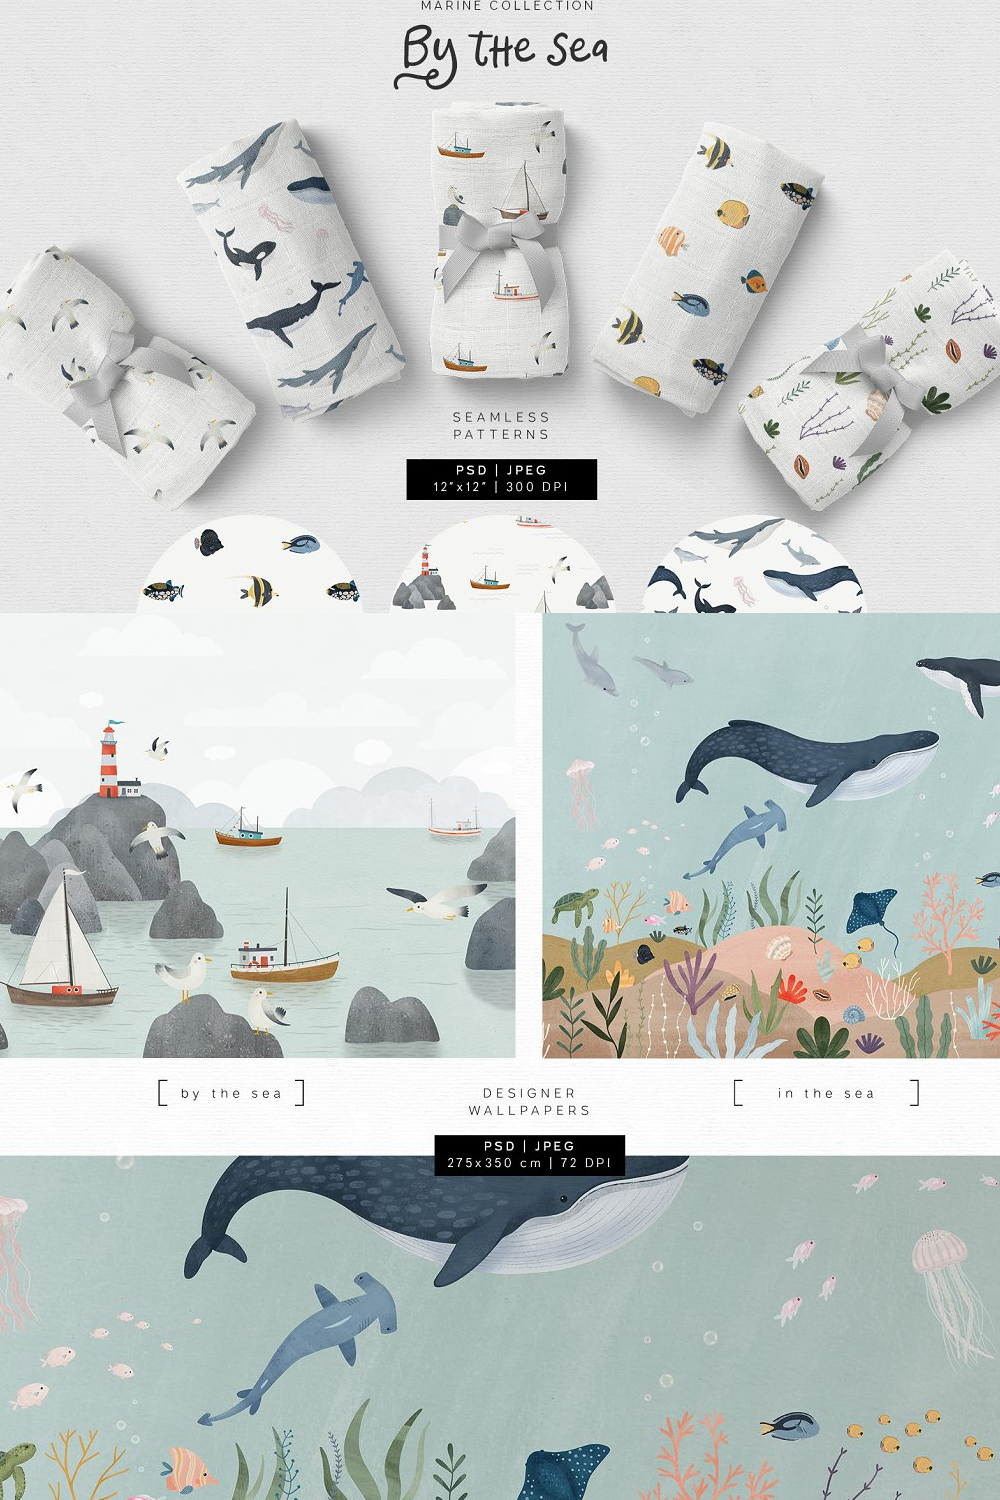 Illustrations by the sea. marine collection of pinterest.